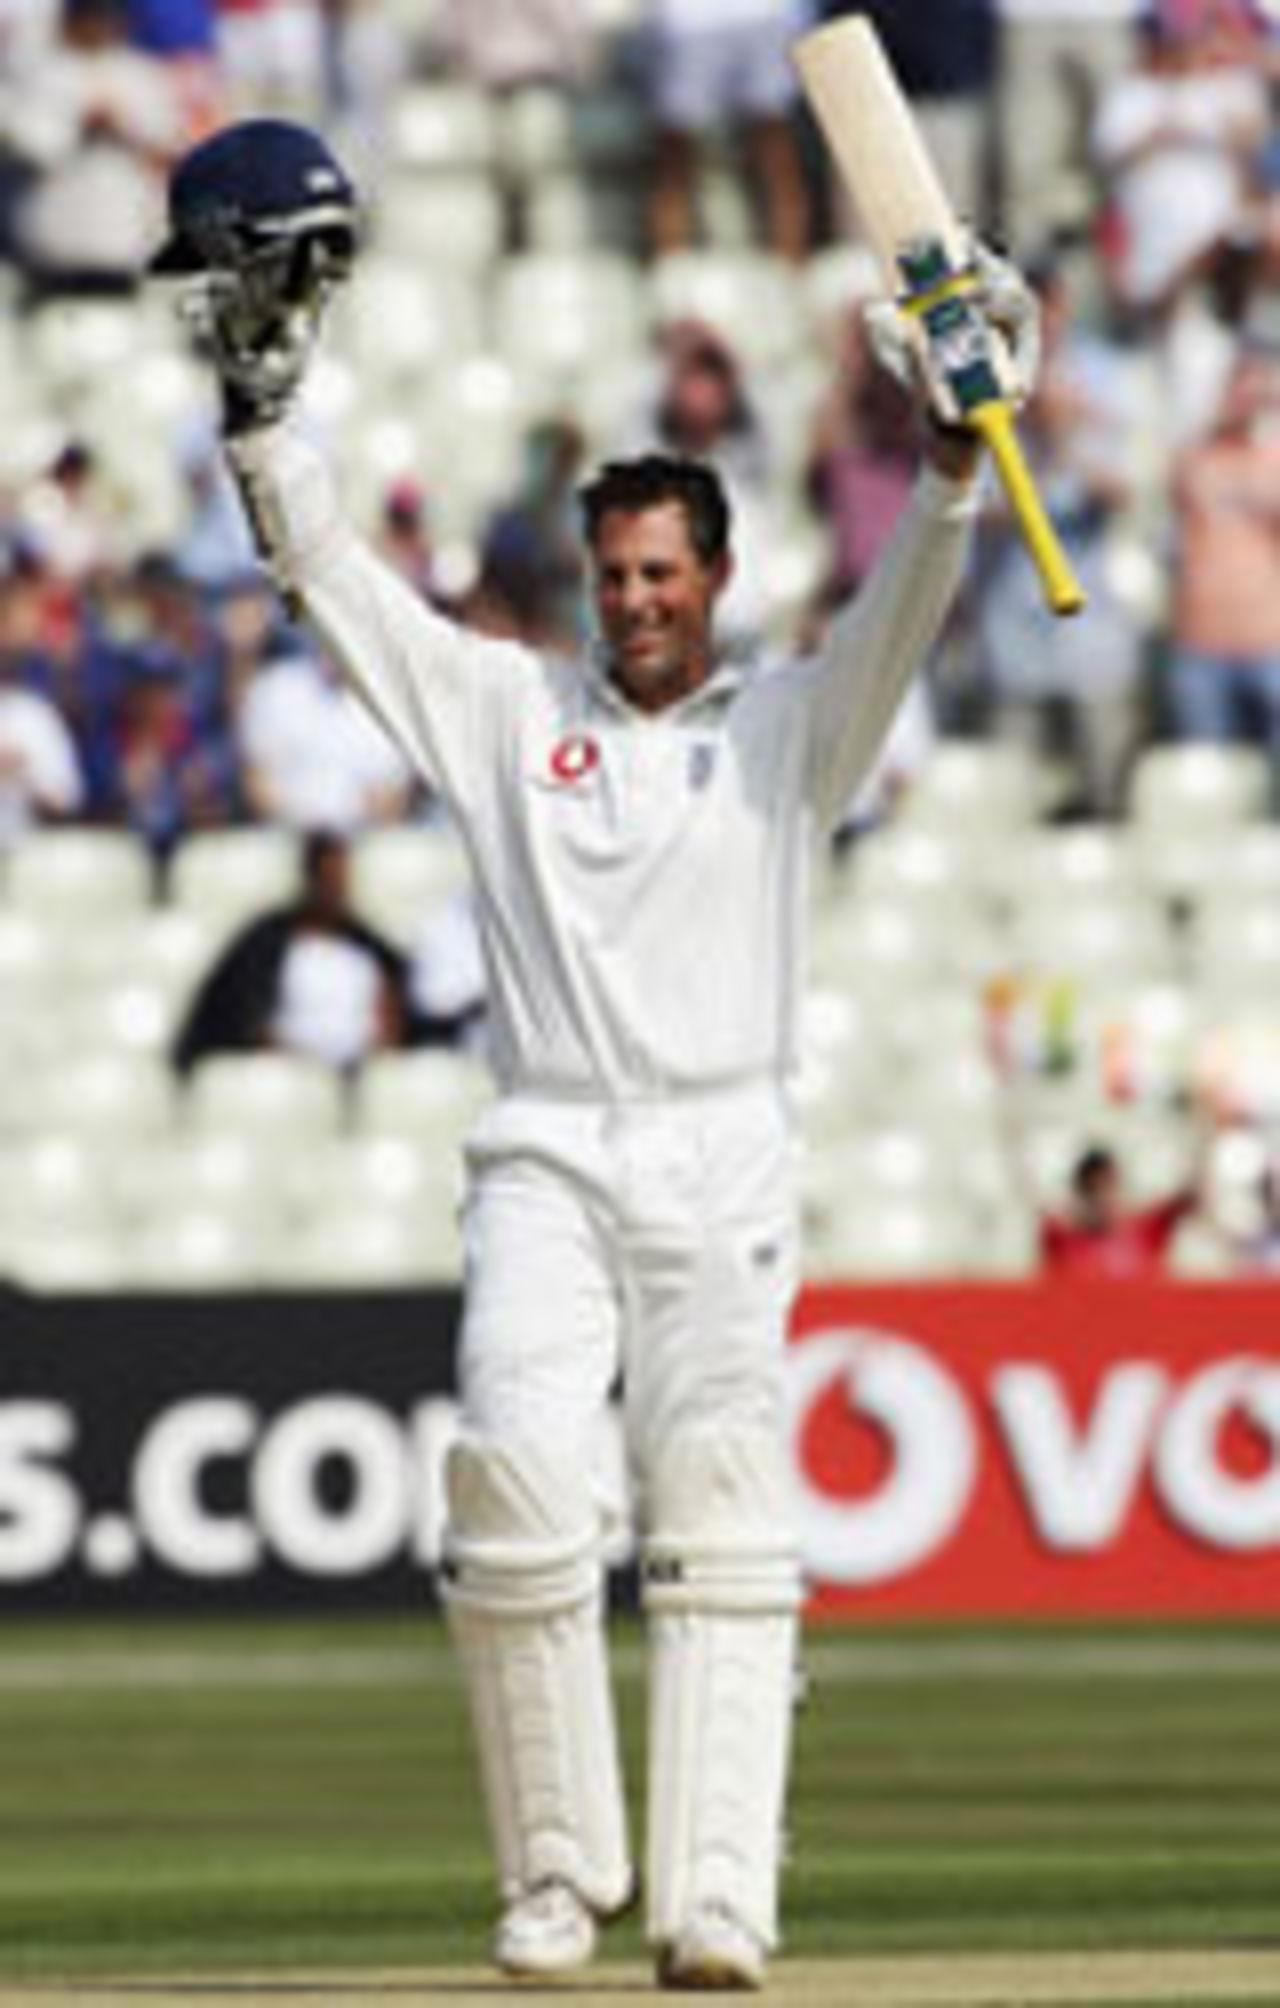 Marcus Trescothick celebrates his second century of the match, England v West Indies, 2nd Test, Edgbaston, August 1, 2004